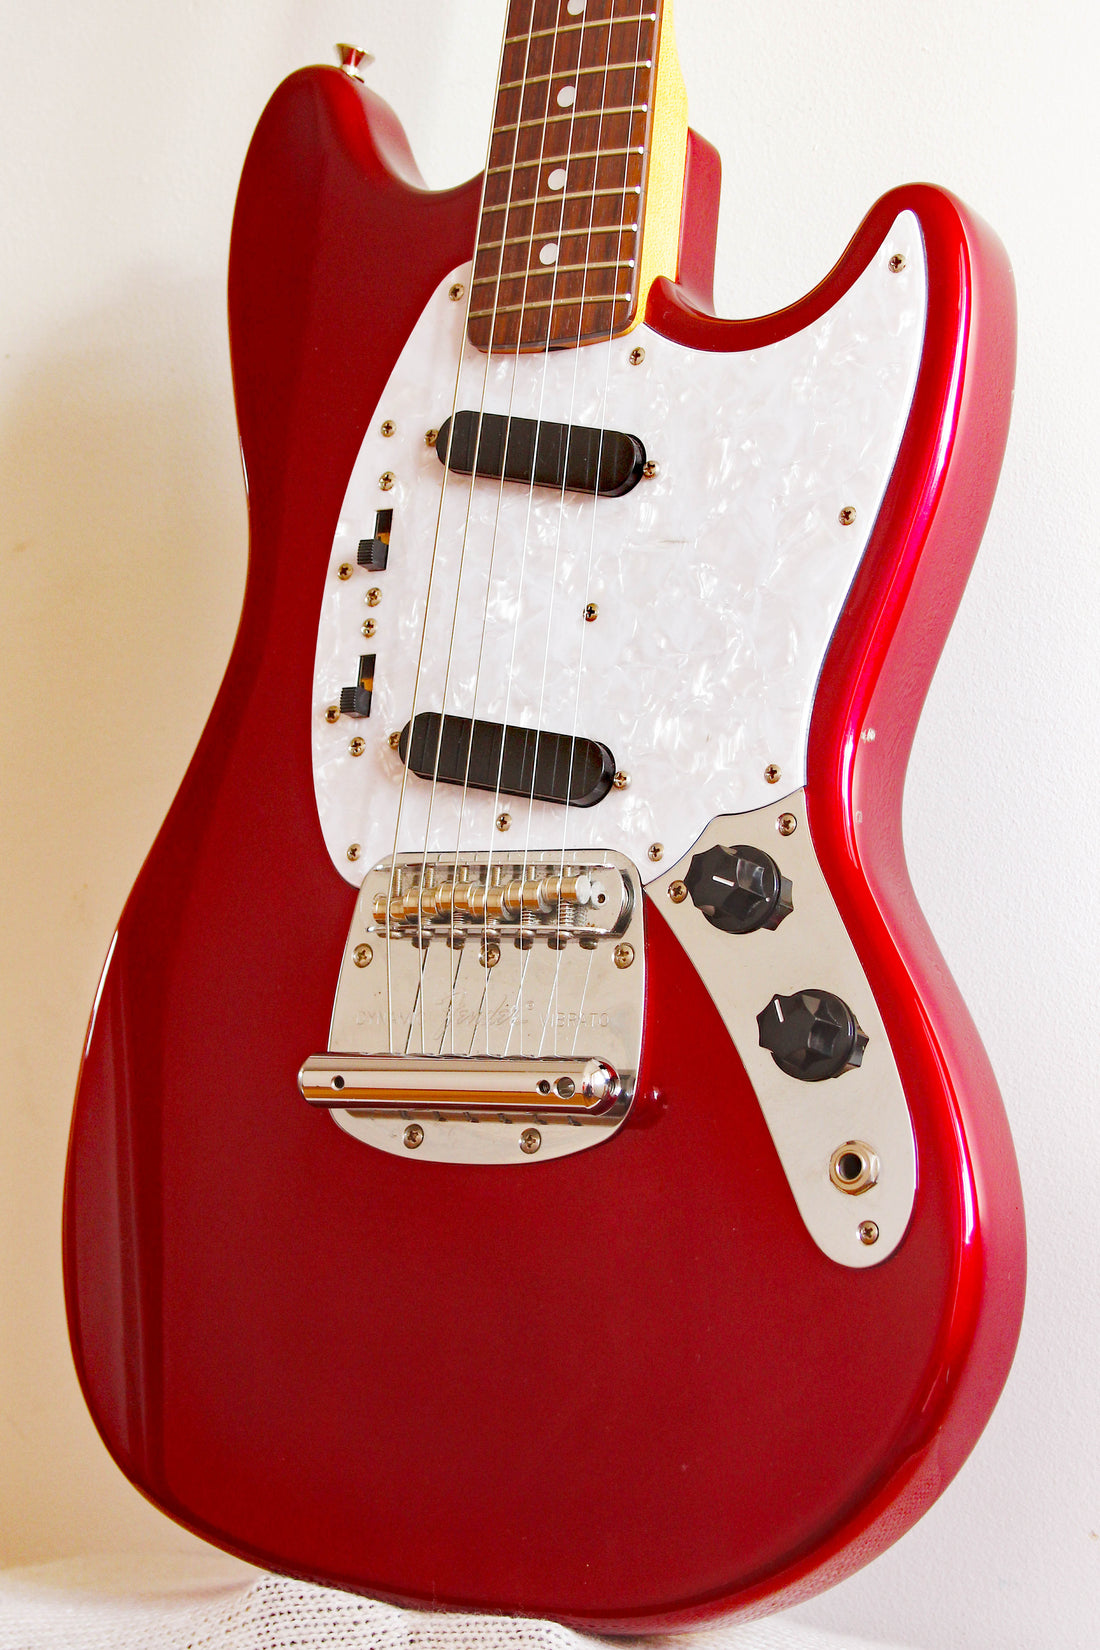 Used Fender Mustang 69 Reissue Candy Apple Red